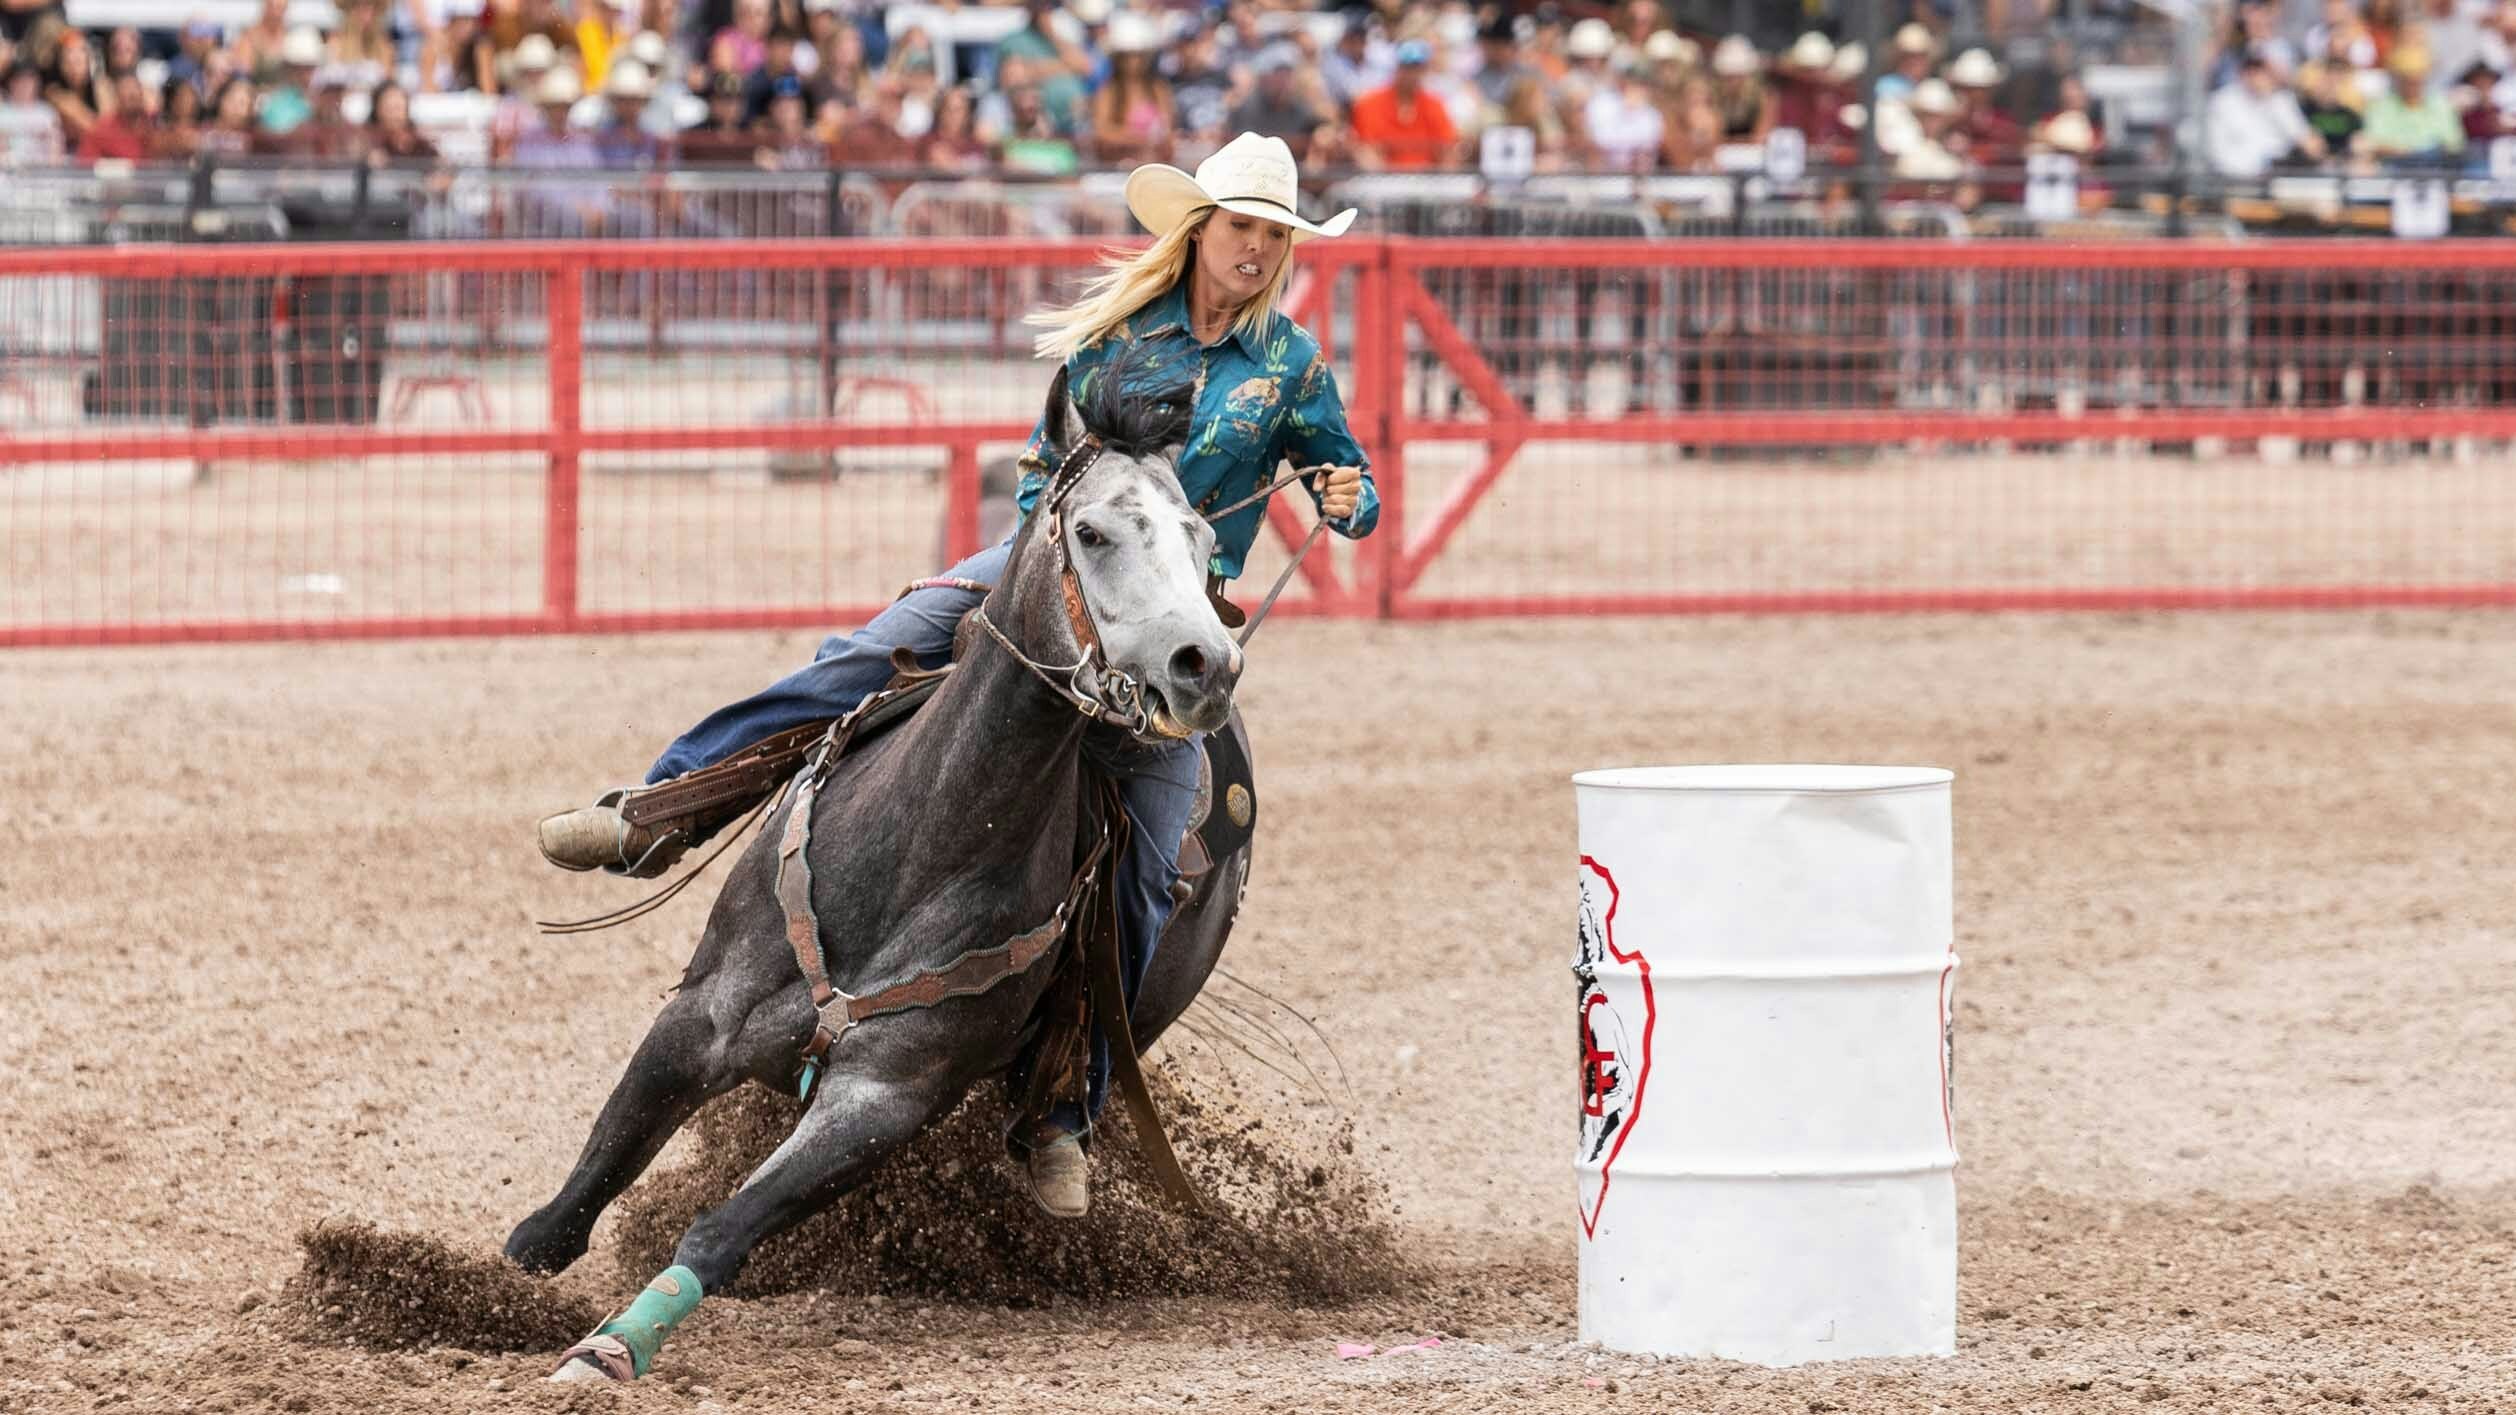 Karson Bradley from Big Piney, Wyoming goes around the 3rd barrel in the barrel racing at Cheyenne Frontier Days on July 23, 2023.